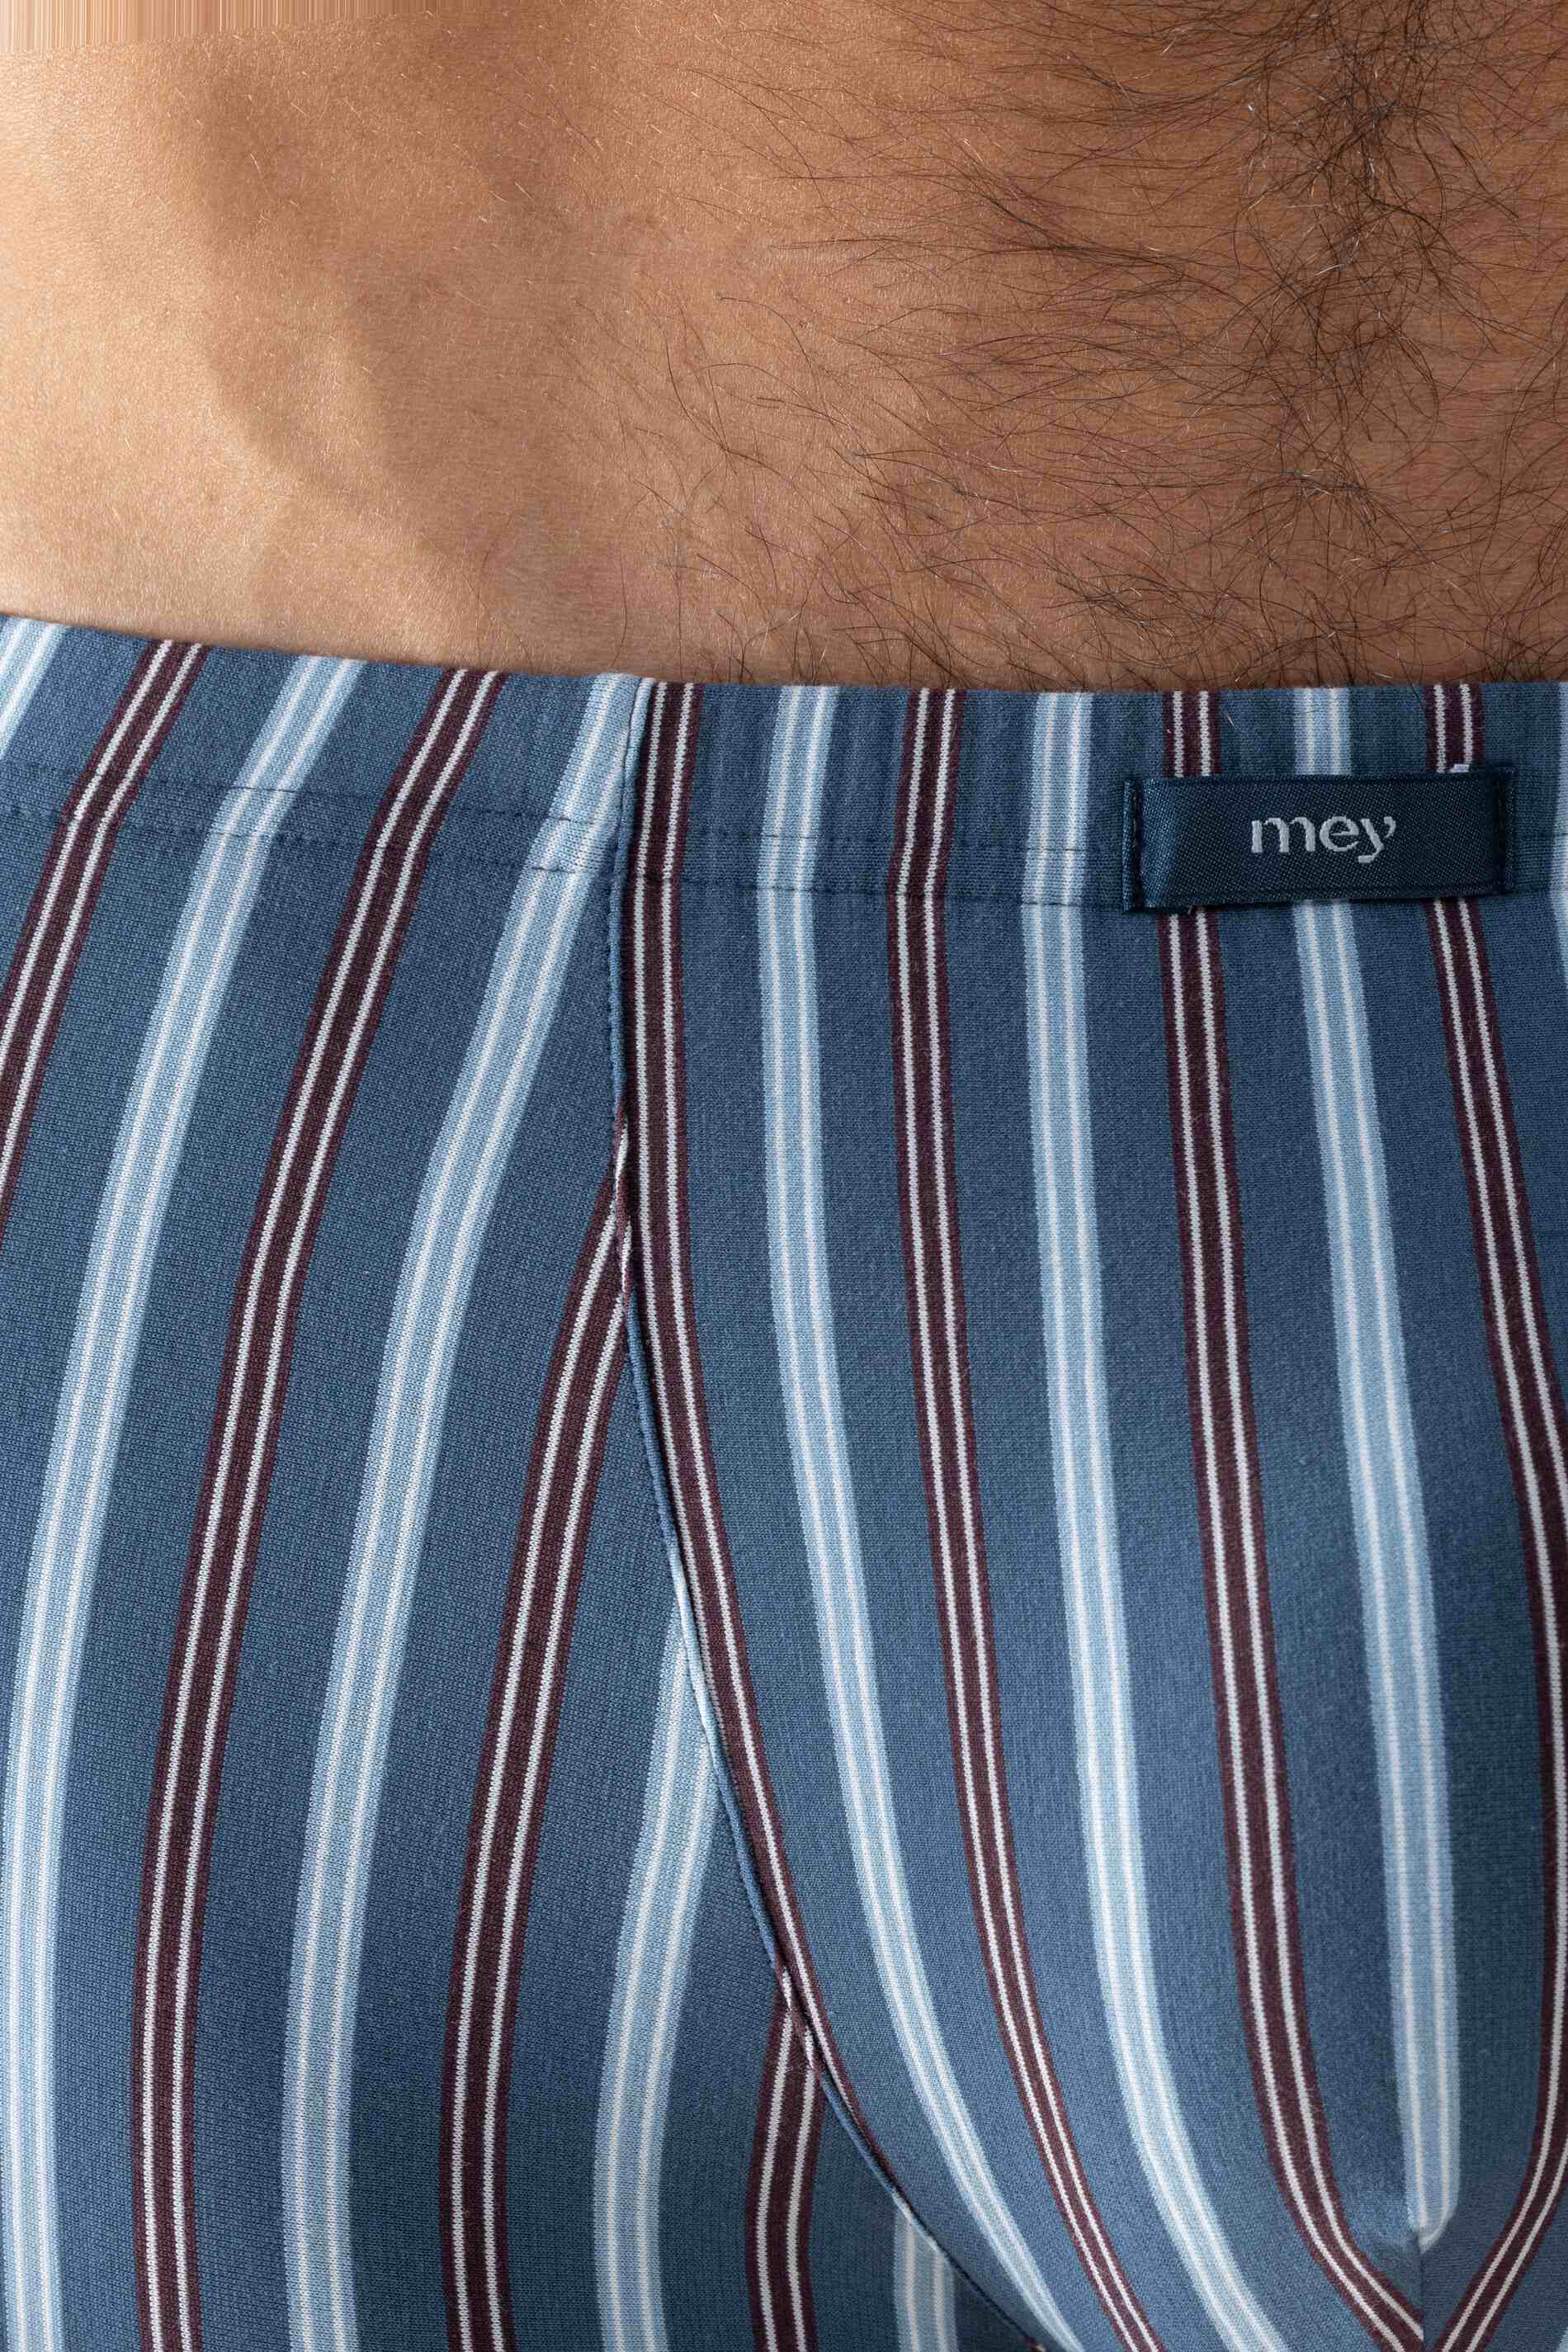 Shorty Serie Blue Striped Detailweergave 01 | mey®